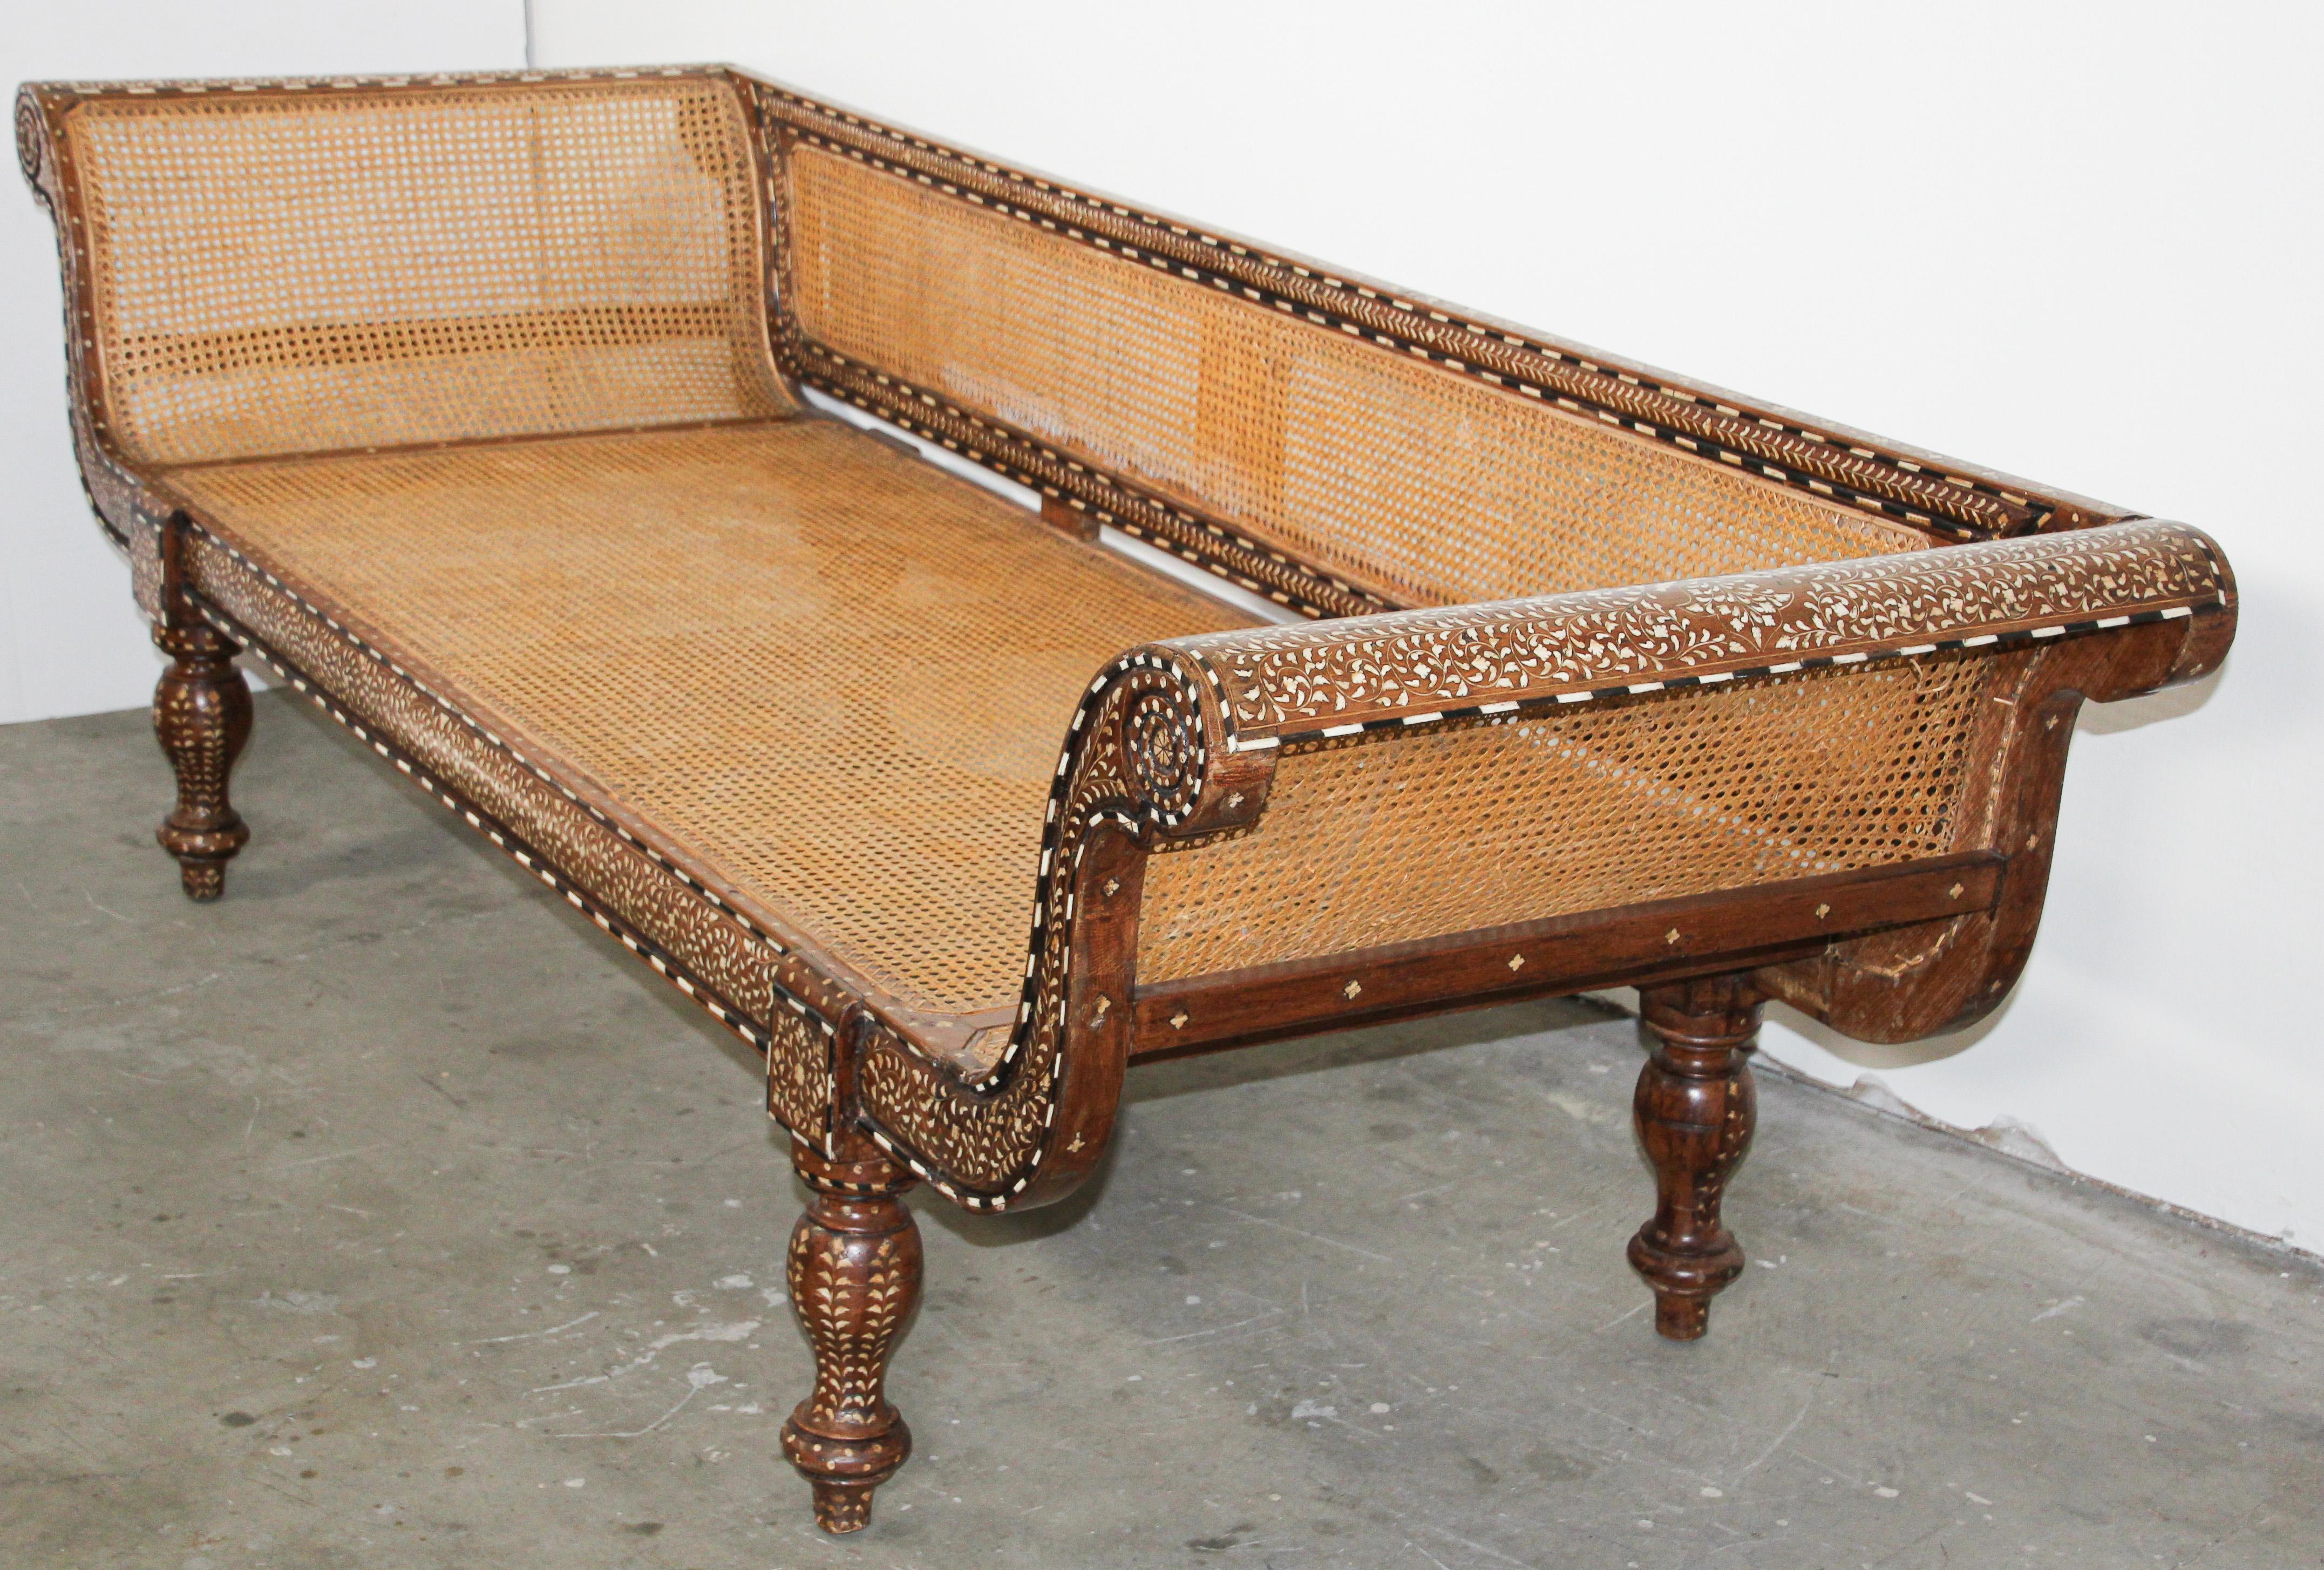 Large Antique hand carved Anglo-Indian sofa, day bed, heavily inlaid with bone.
The Anglo Indian colonial sofa is inlaid with bone and ebony inlays throughout.
Anglo-Indian settee bench handcrafted from hardwood, and wonderfully hand carved and